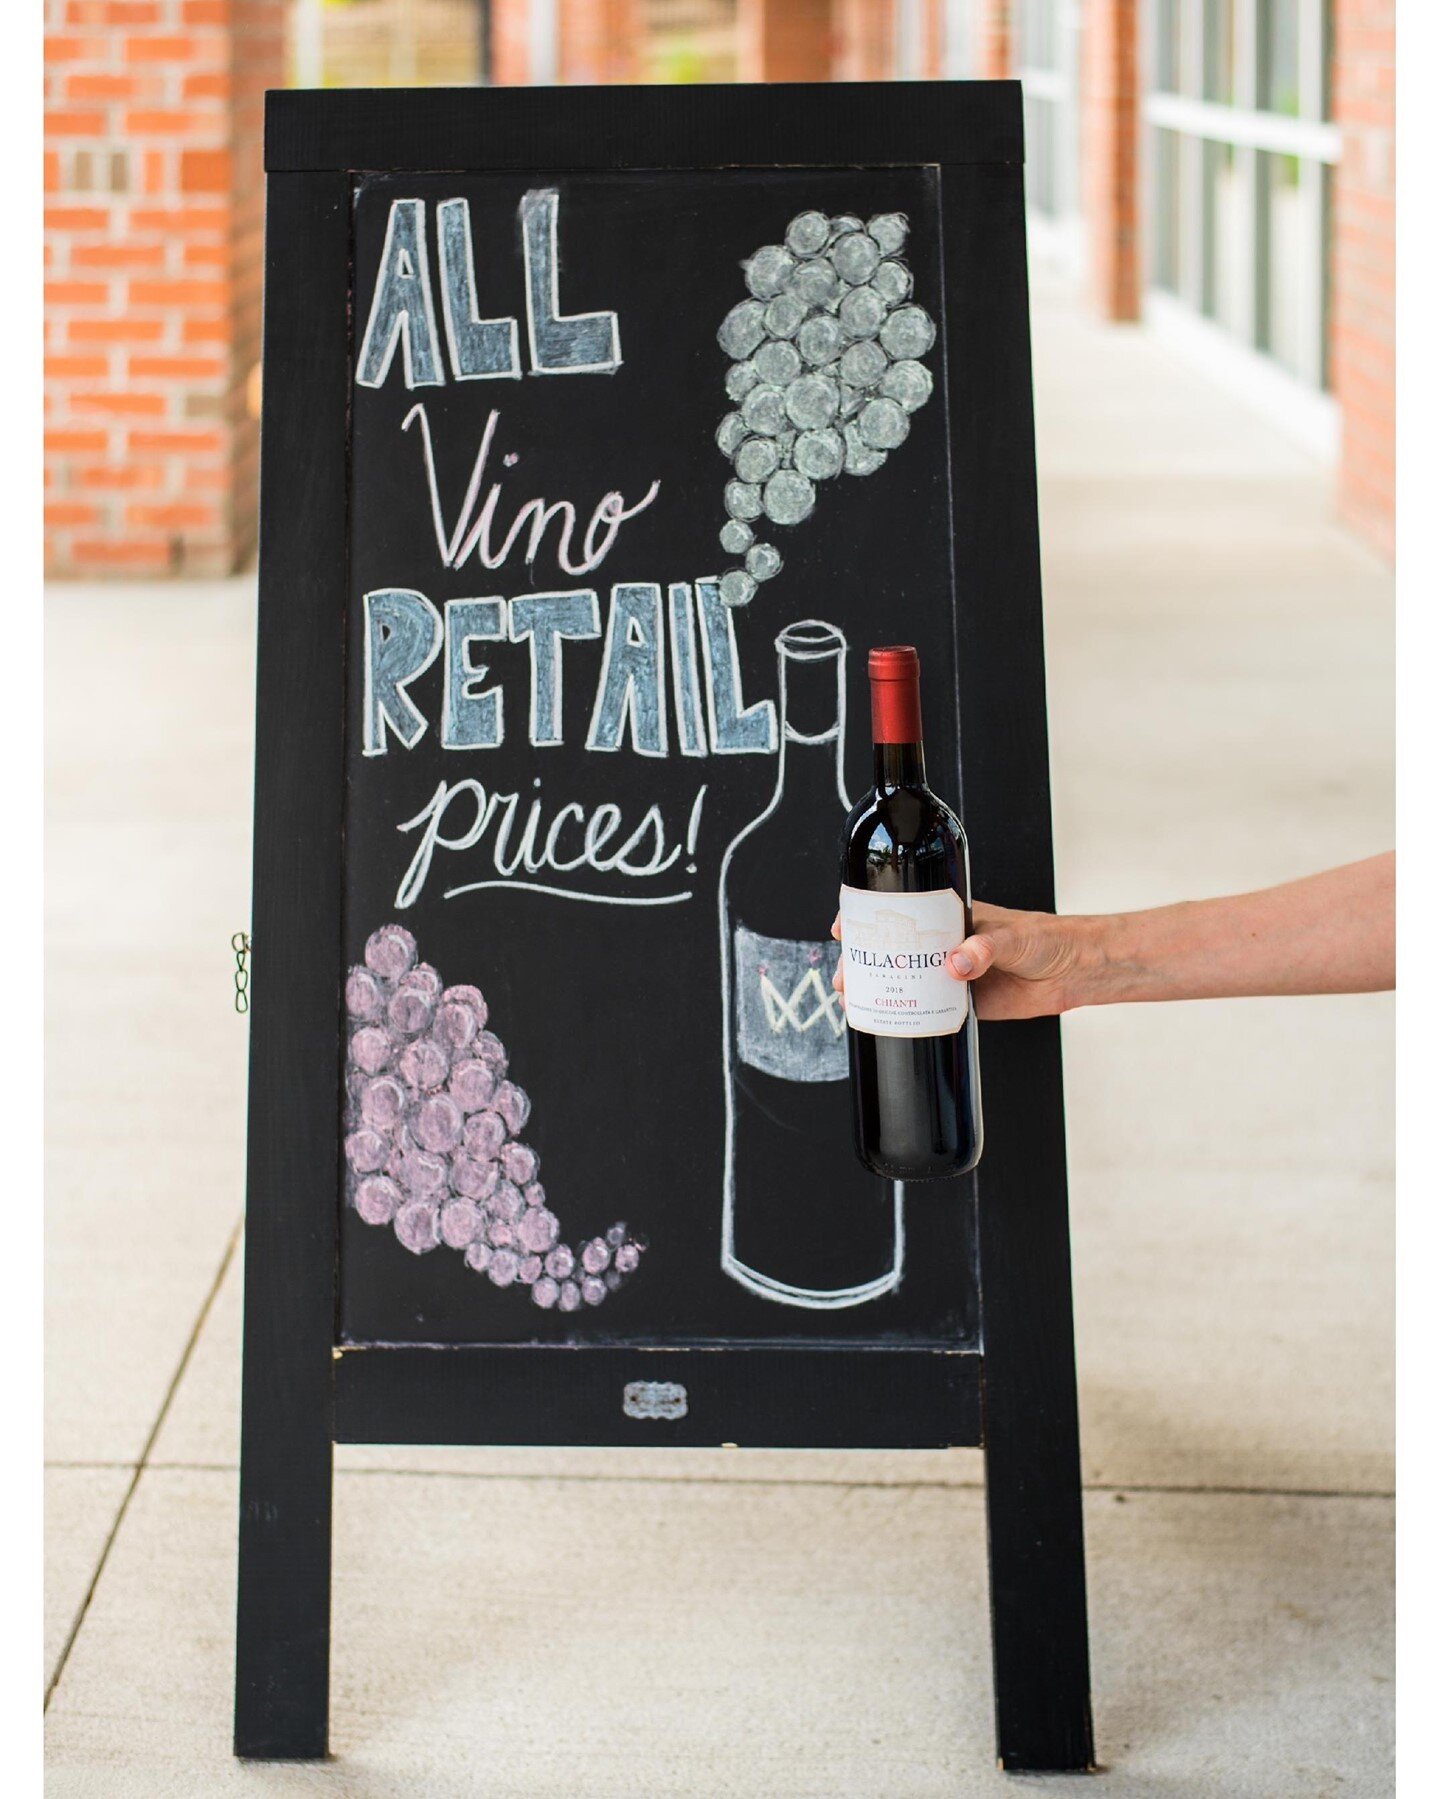 All wine is priced to move! Cracker thin Roman pizza and great bottles of wine at retail prices....

We'll see you on the patio in a prosecco. 😉 

Reservations available via our link in bio. Patio dining and takeout are available from 4 - 9pm, Tuesd